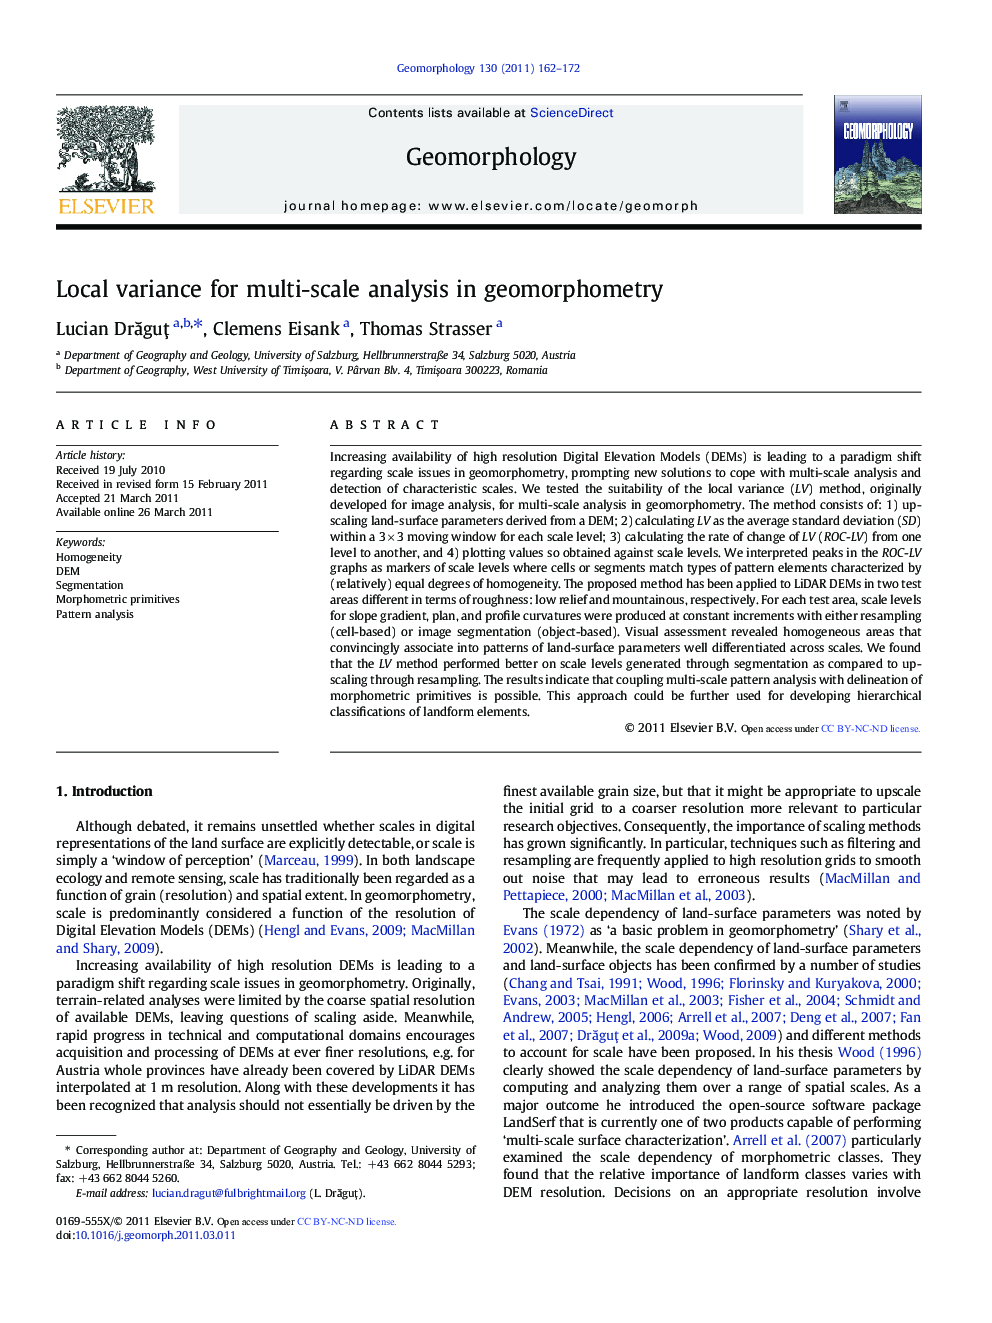 Local variance for multi-scale analysis in geomorphometry